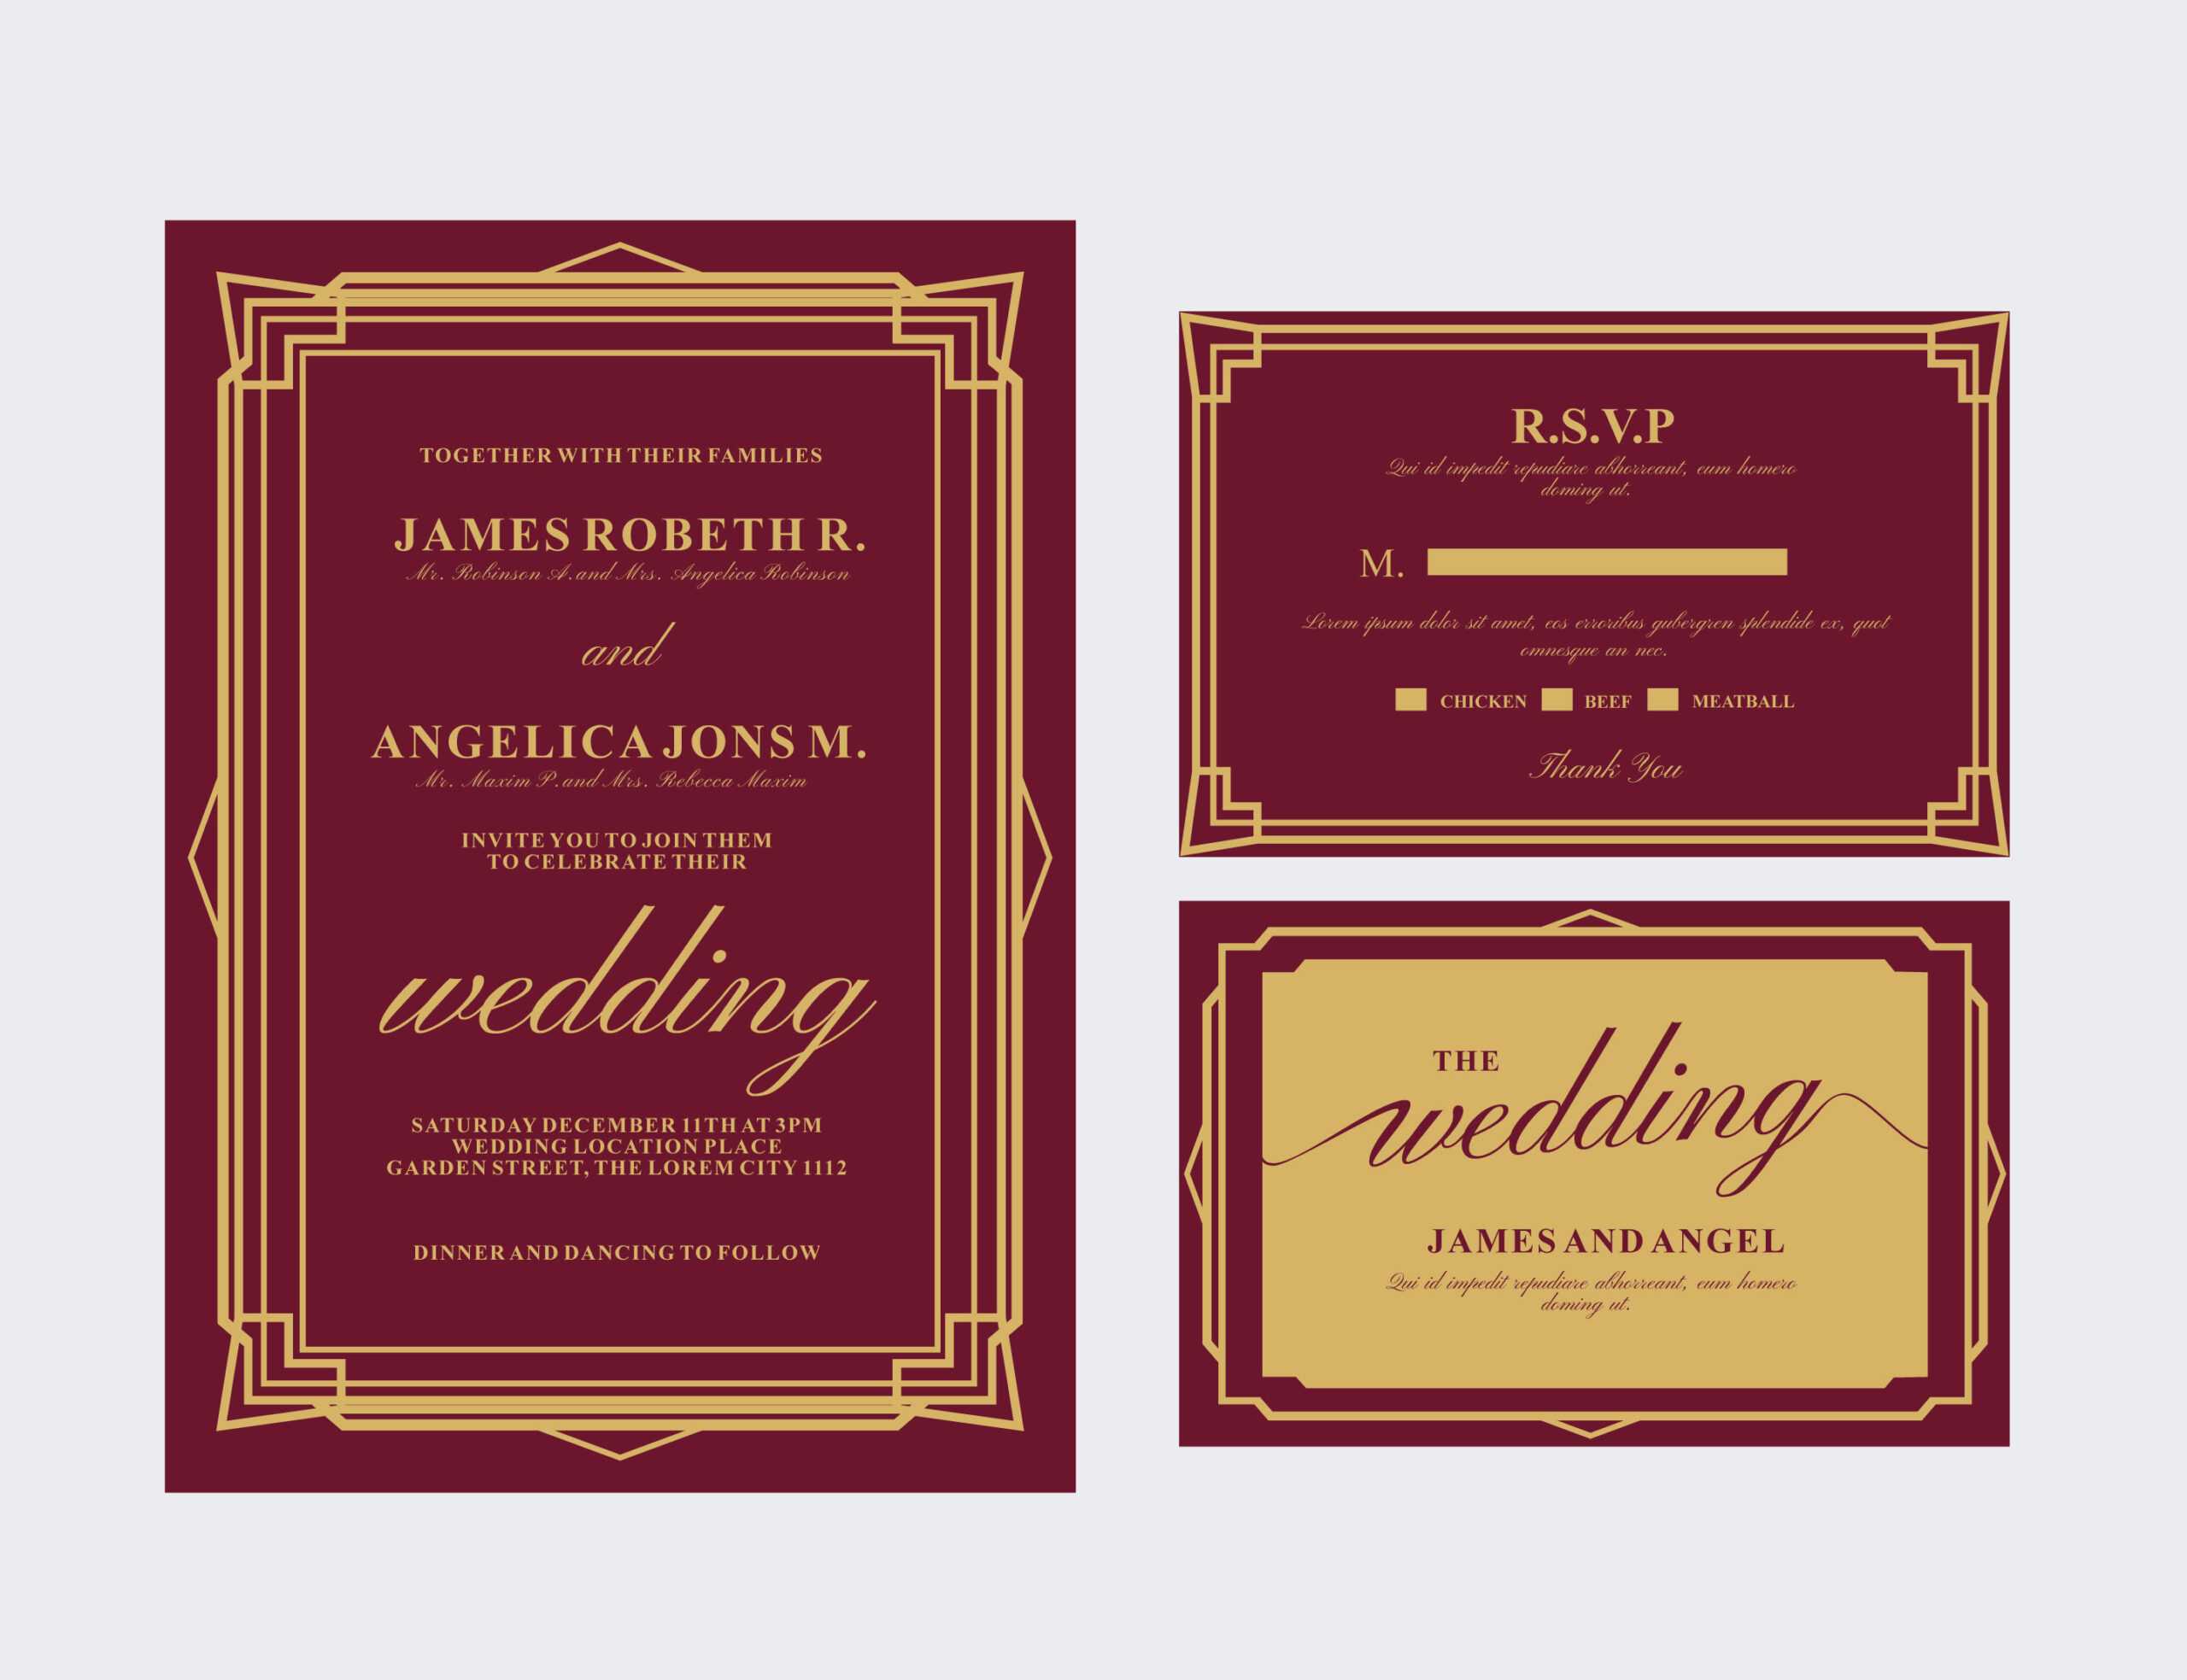 Indian Wedding Card Free Vector Art – (418 Free Downloads) For Indian Wedding Cards Design Templates